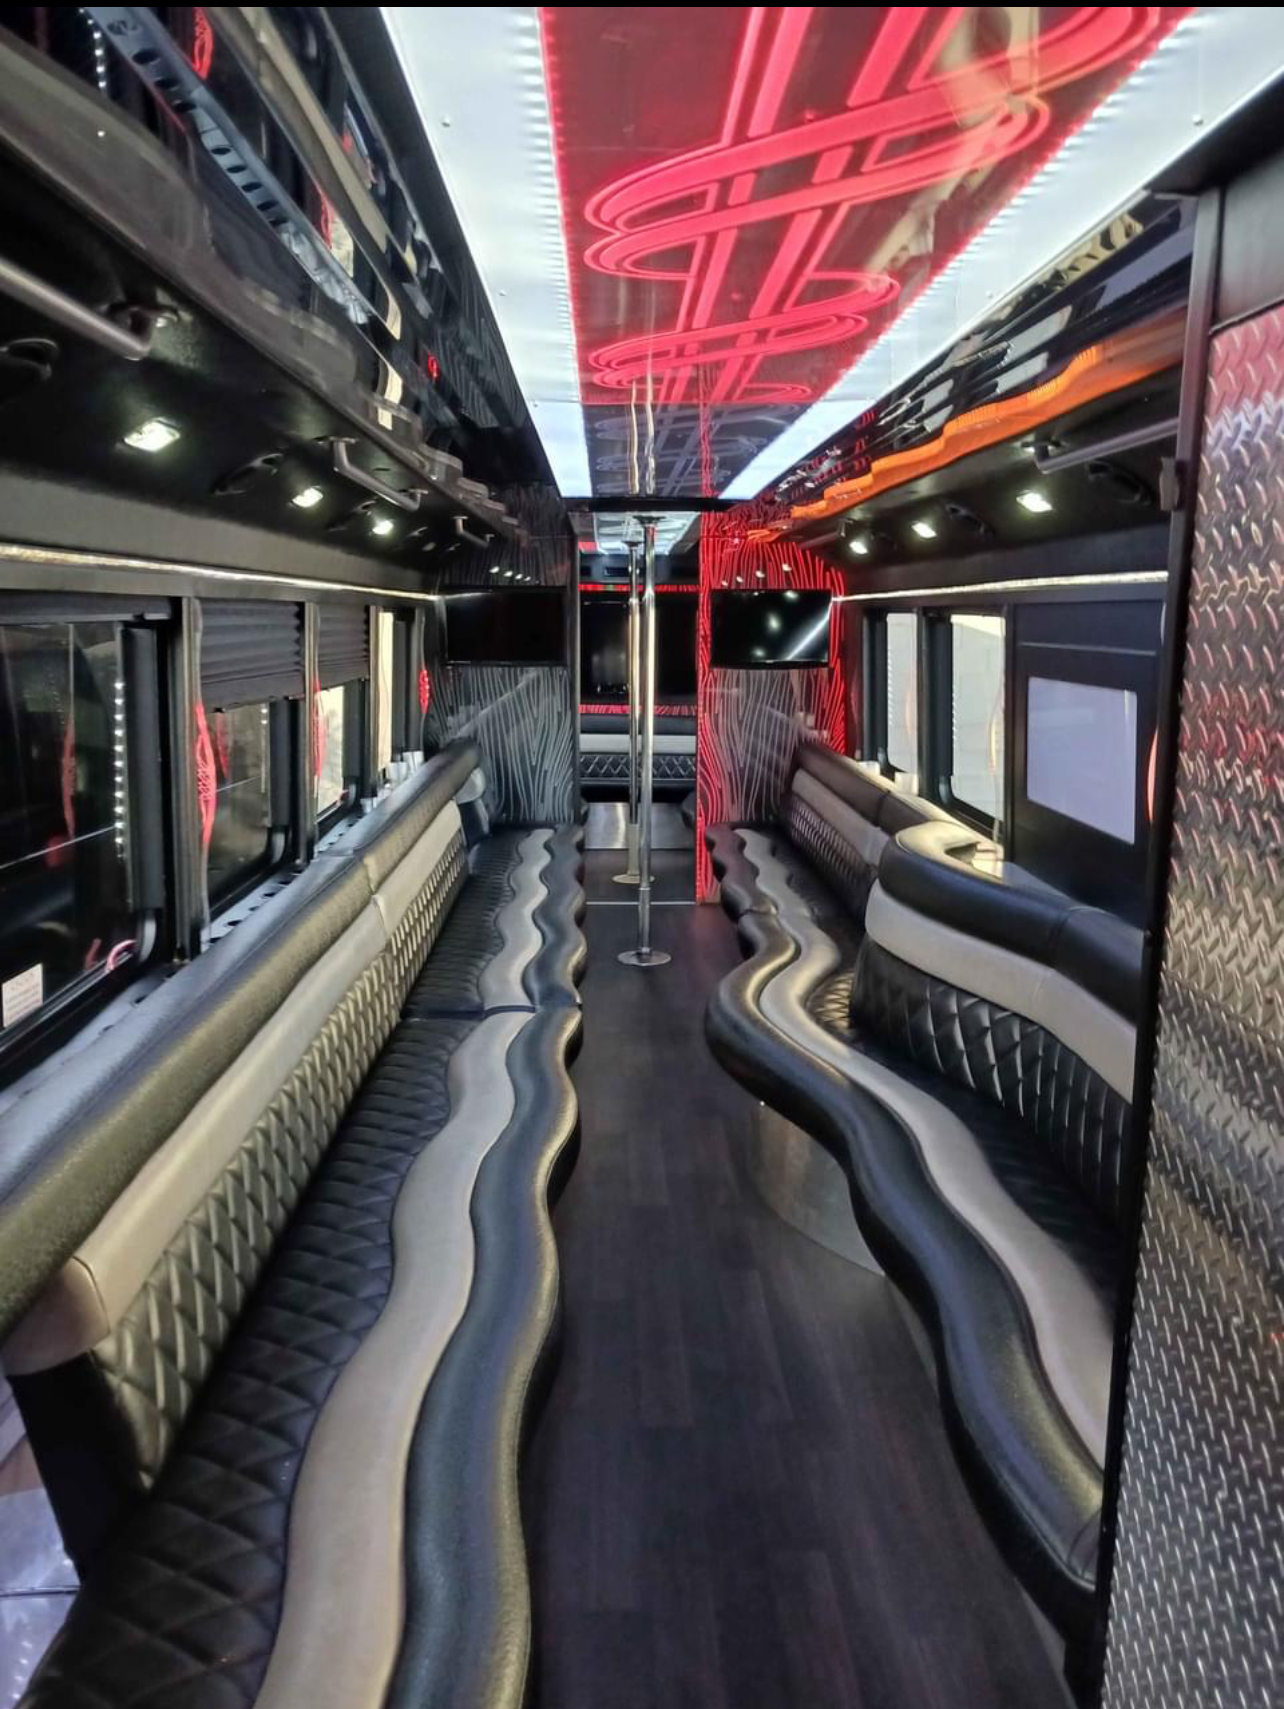 2011 Ford F-750 Goliath Party Bus